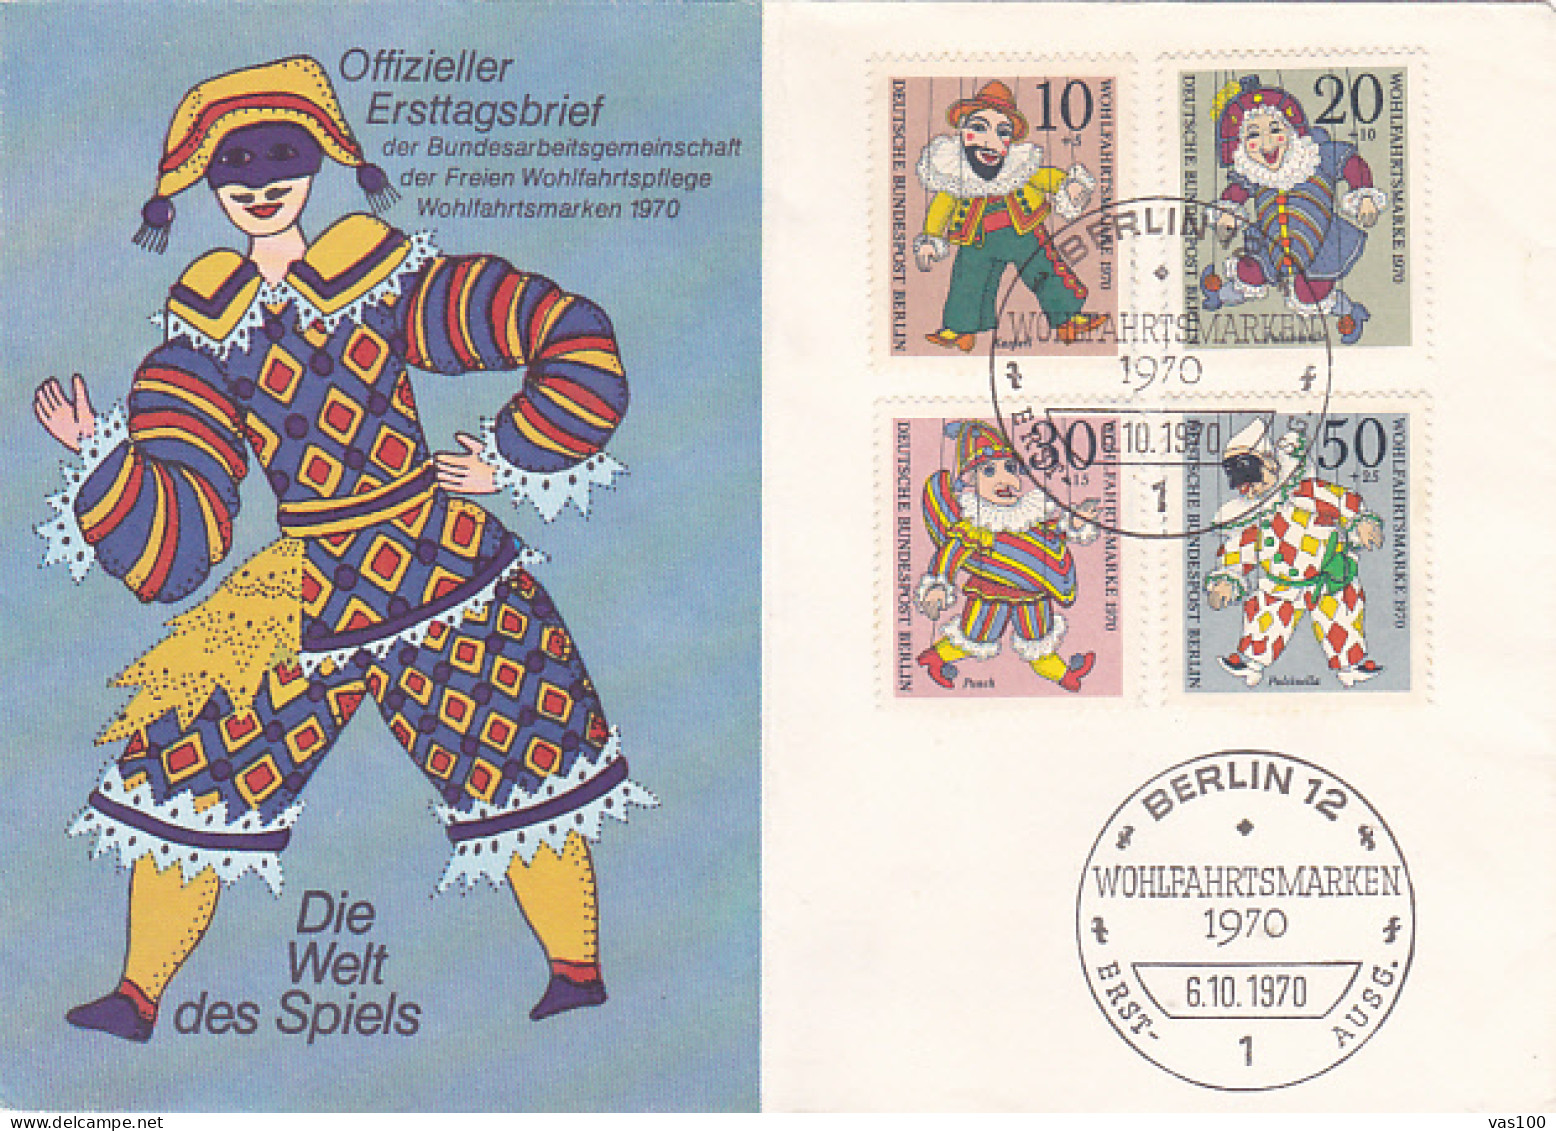 CHILDRENS, PUPPETS, CHARITY STAMPS, COVER FDC, 1970, GERMANY - Marionnettes